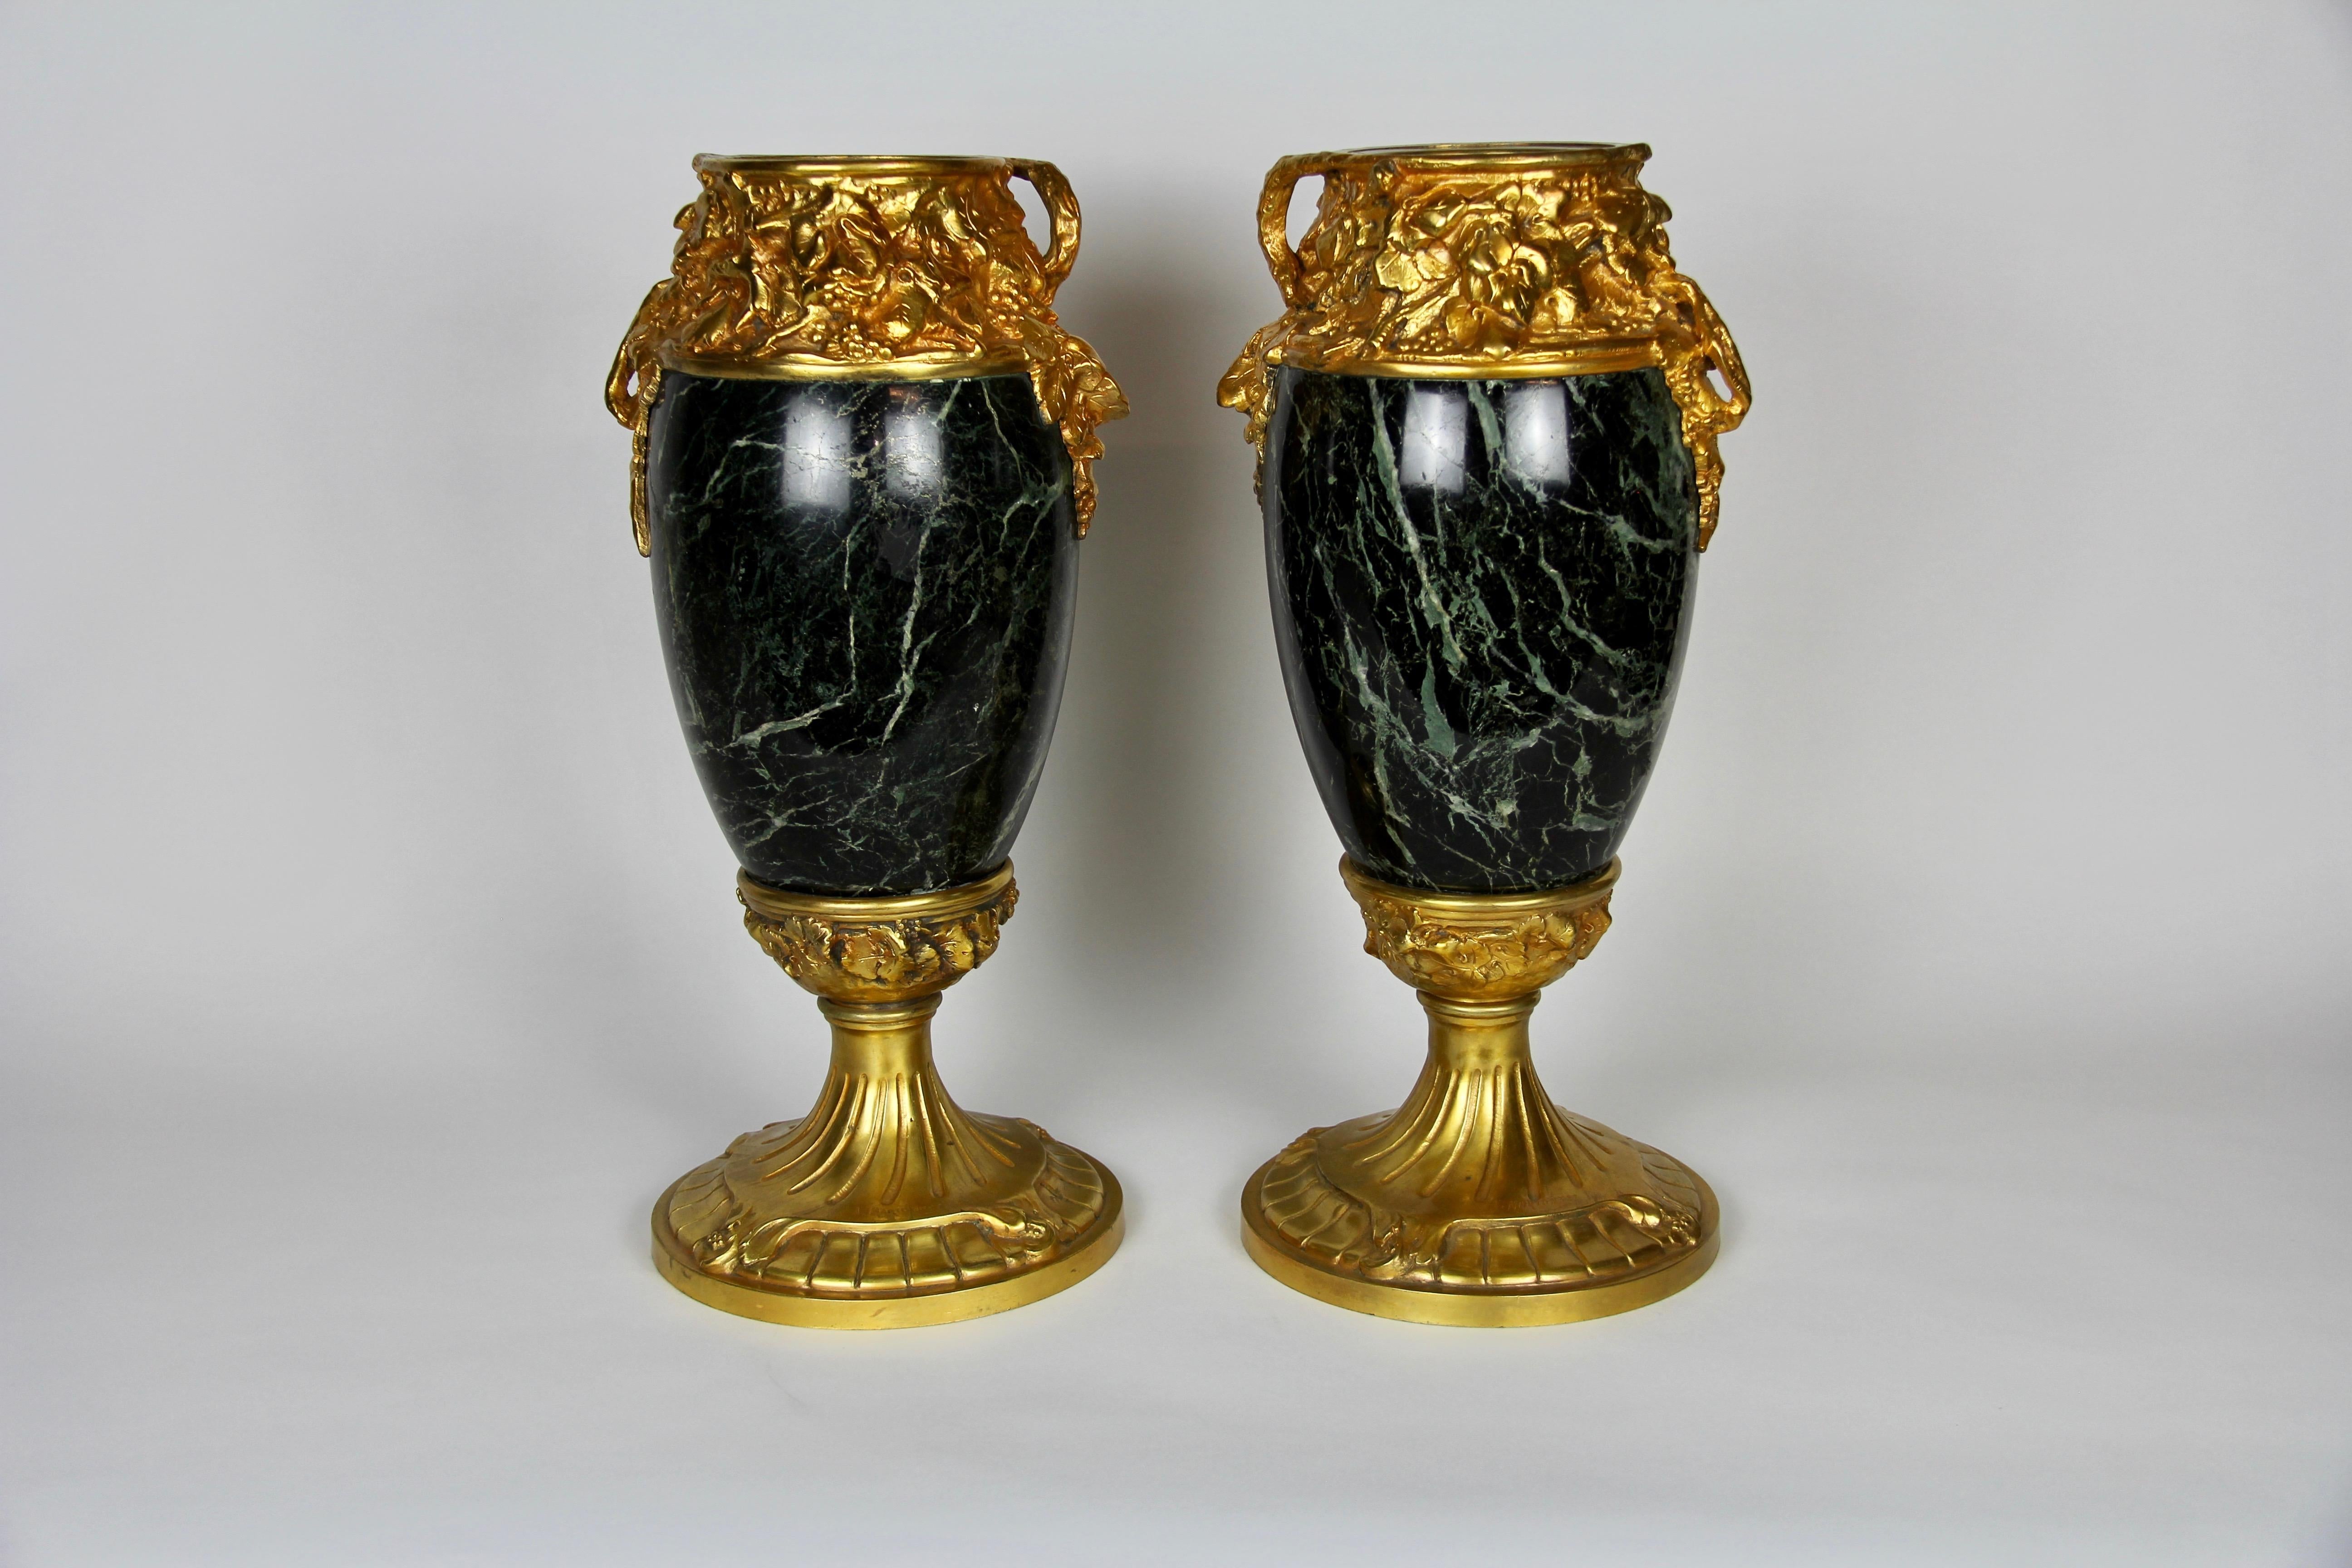 A fabulous pair of French Art Nouveau Dore bronze mounted Verde Antico marble vases, signed A. Marionnet. Of ovoid form with beautifully hand-carved Verde Antico marble body. The bronze is cast, hand-chiseled, and chased with decorations of birds,